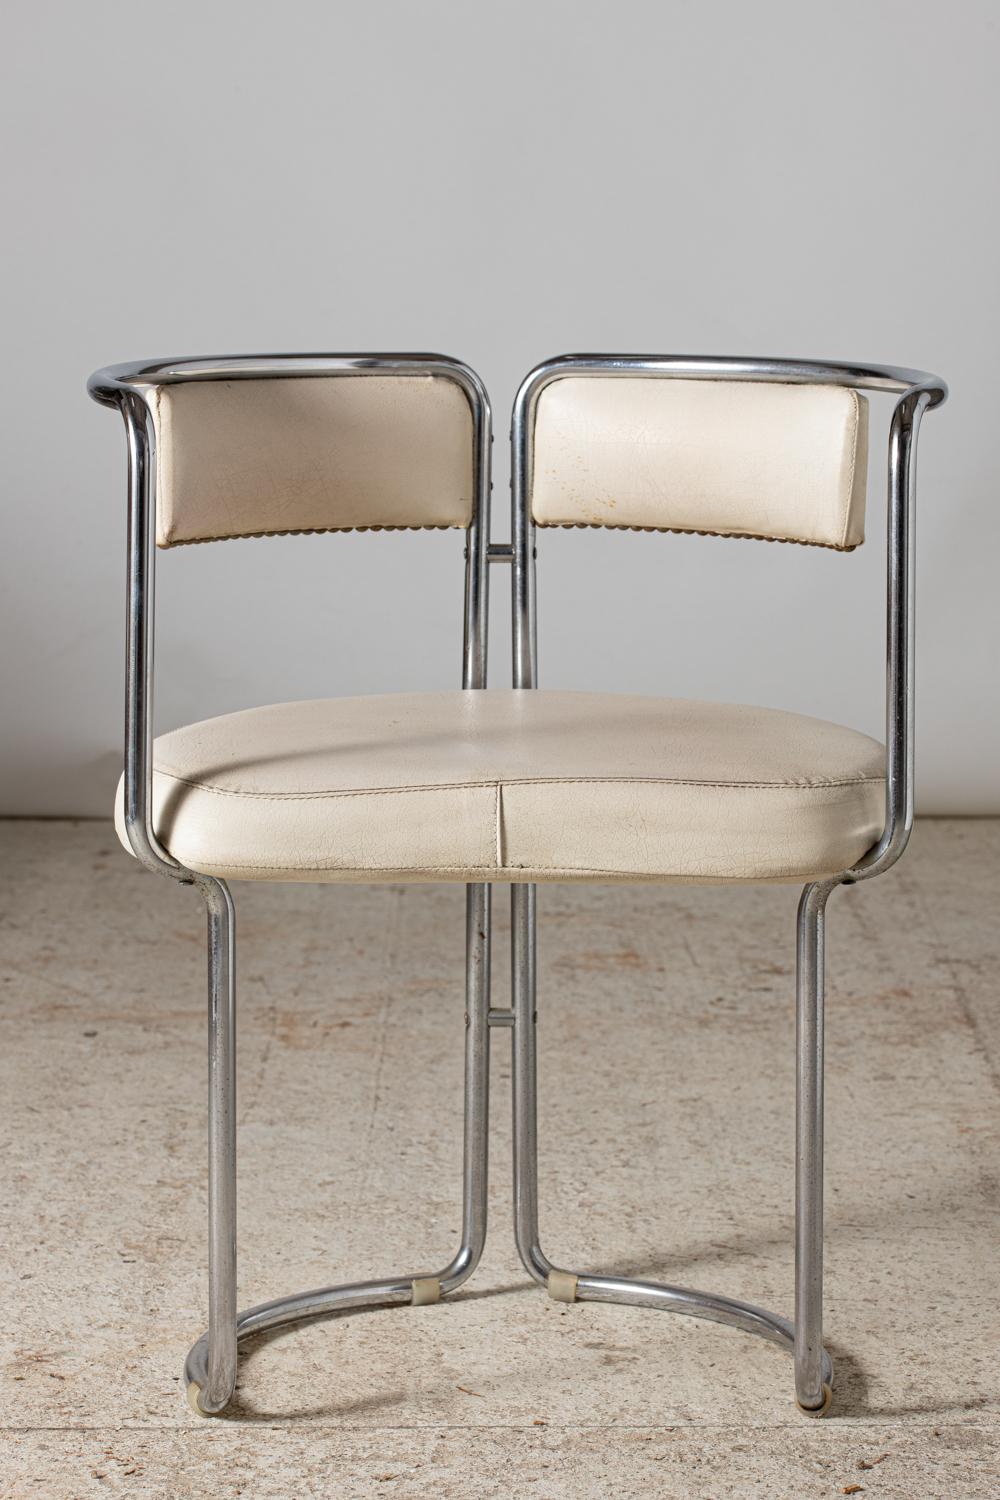 Set of four round dining room armchairs in chrome and original upholstery in off-white leatherette.